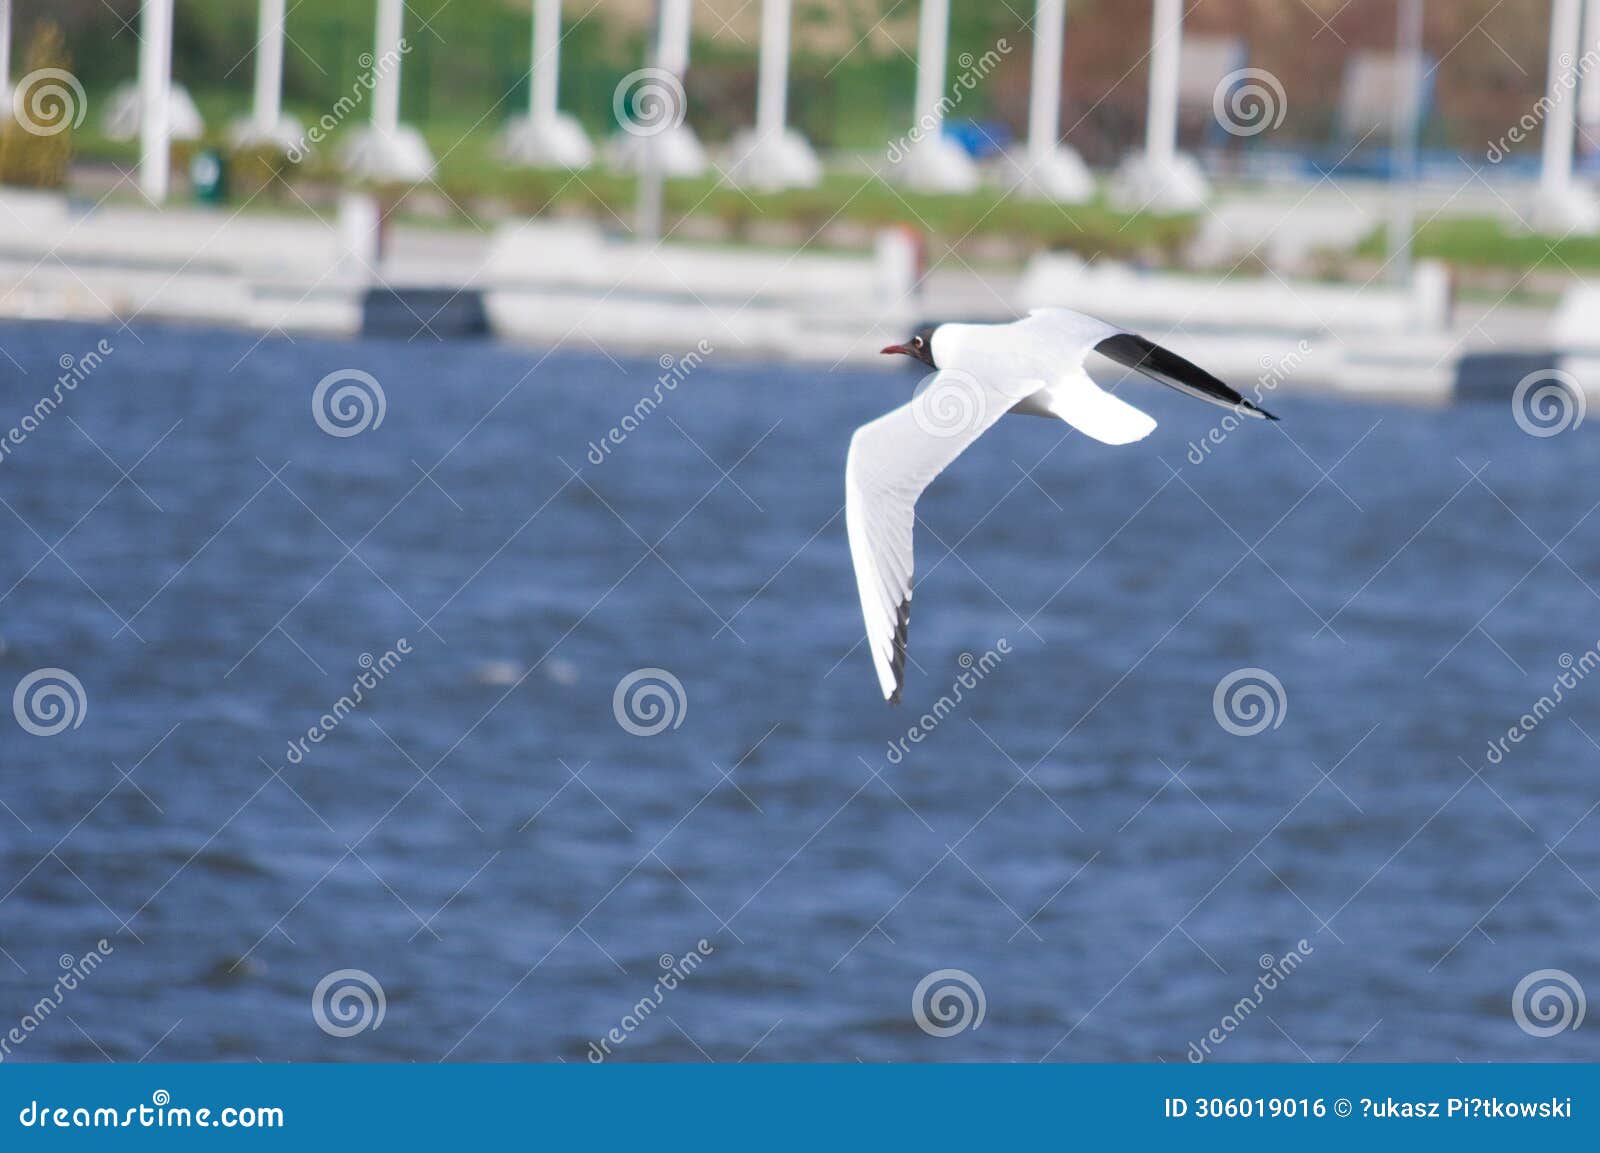 a seagull flying over lake malta in pozna? (poland)